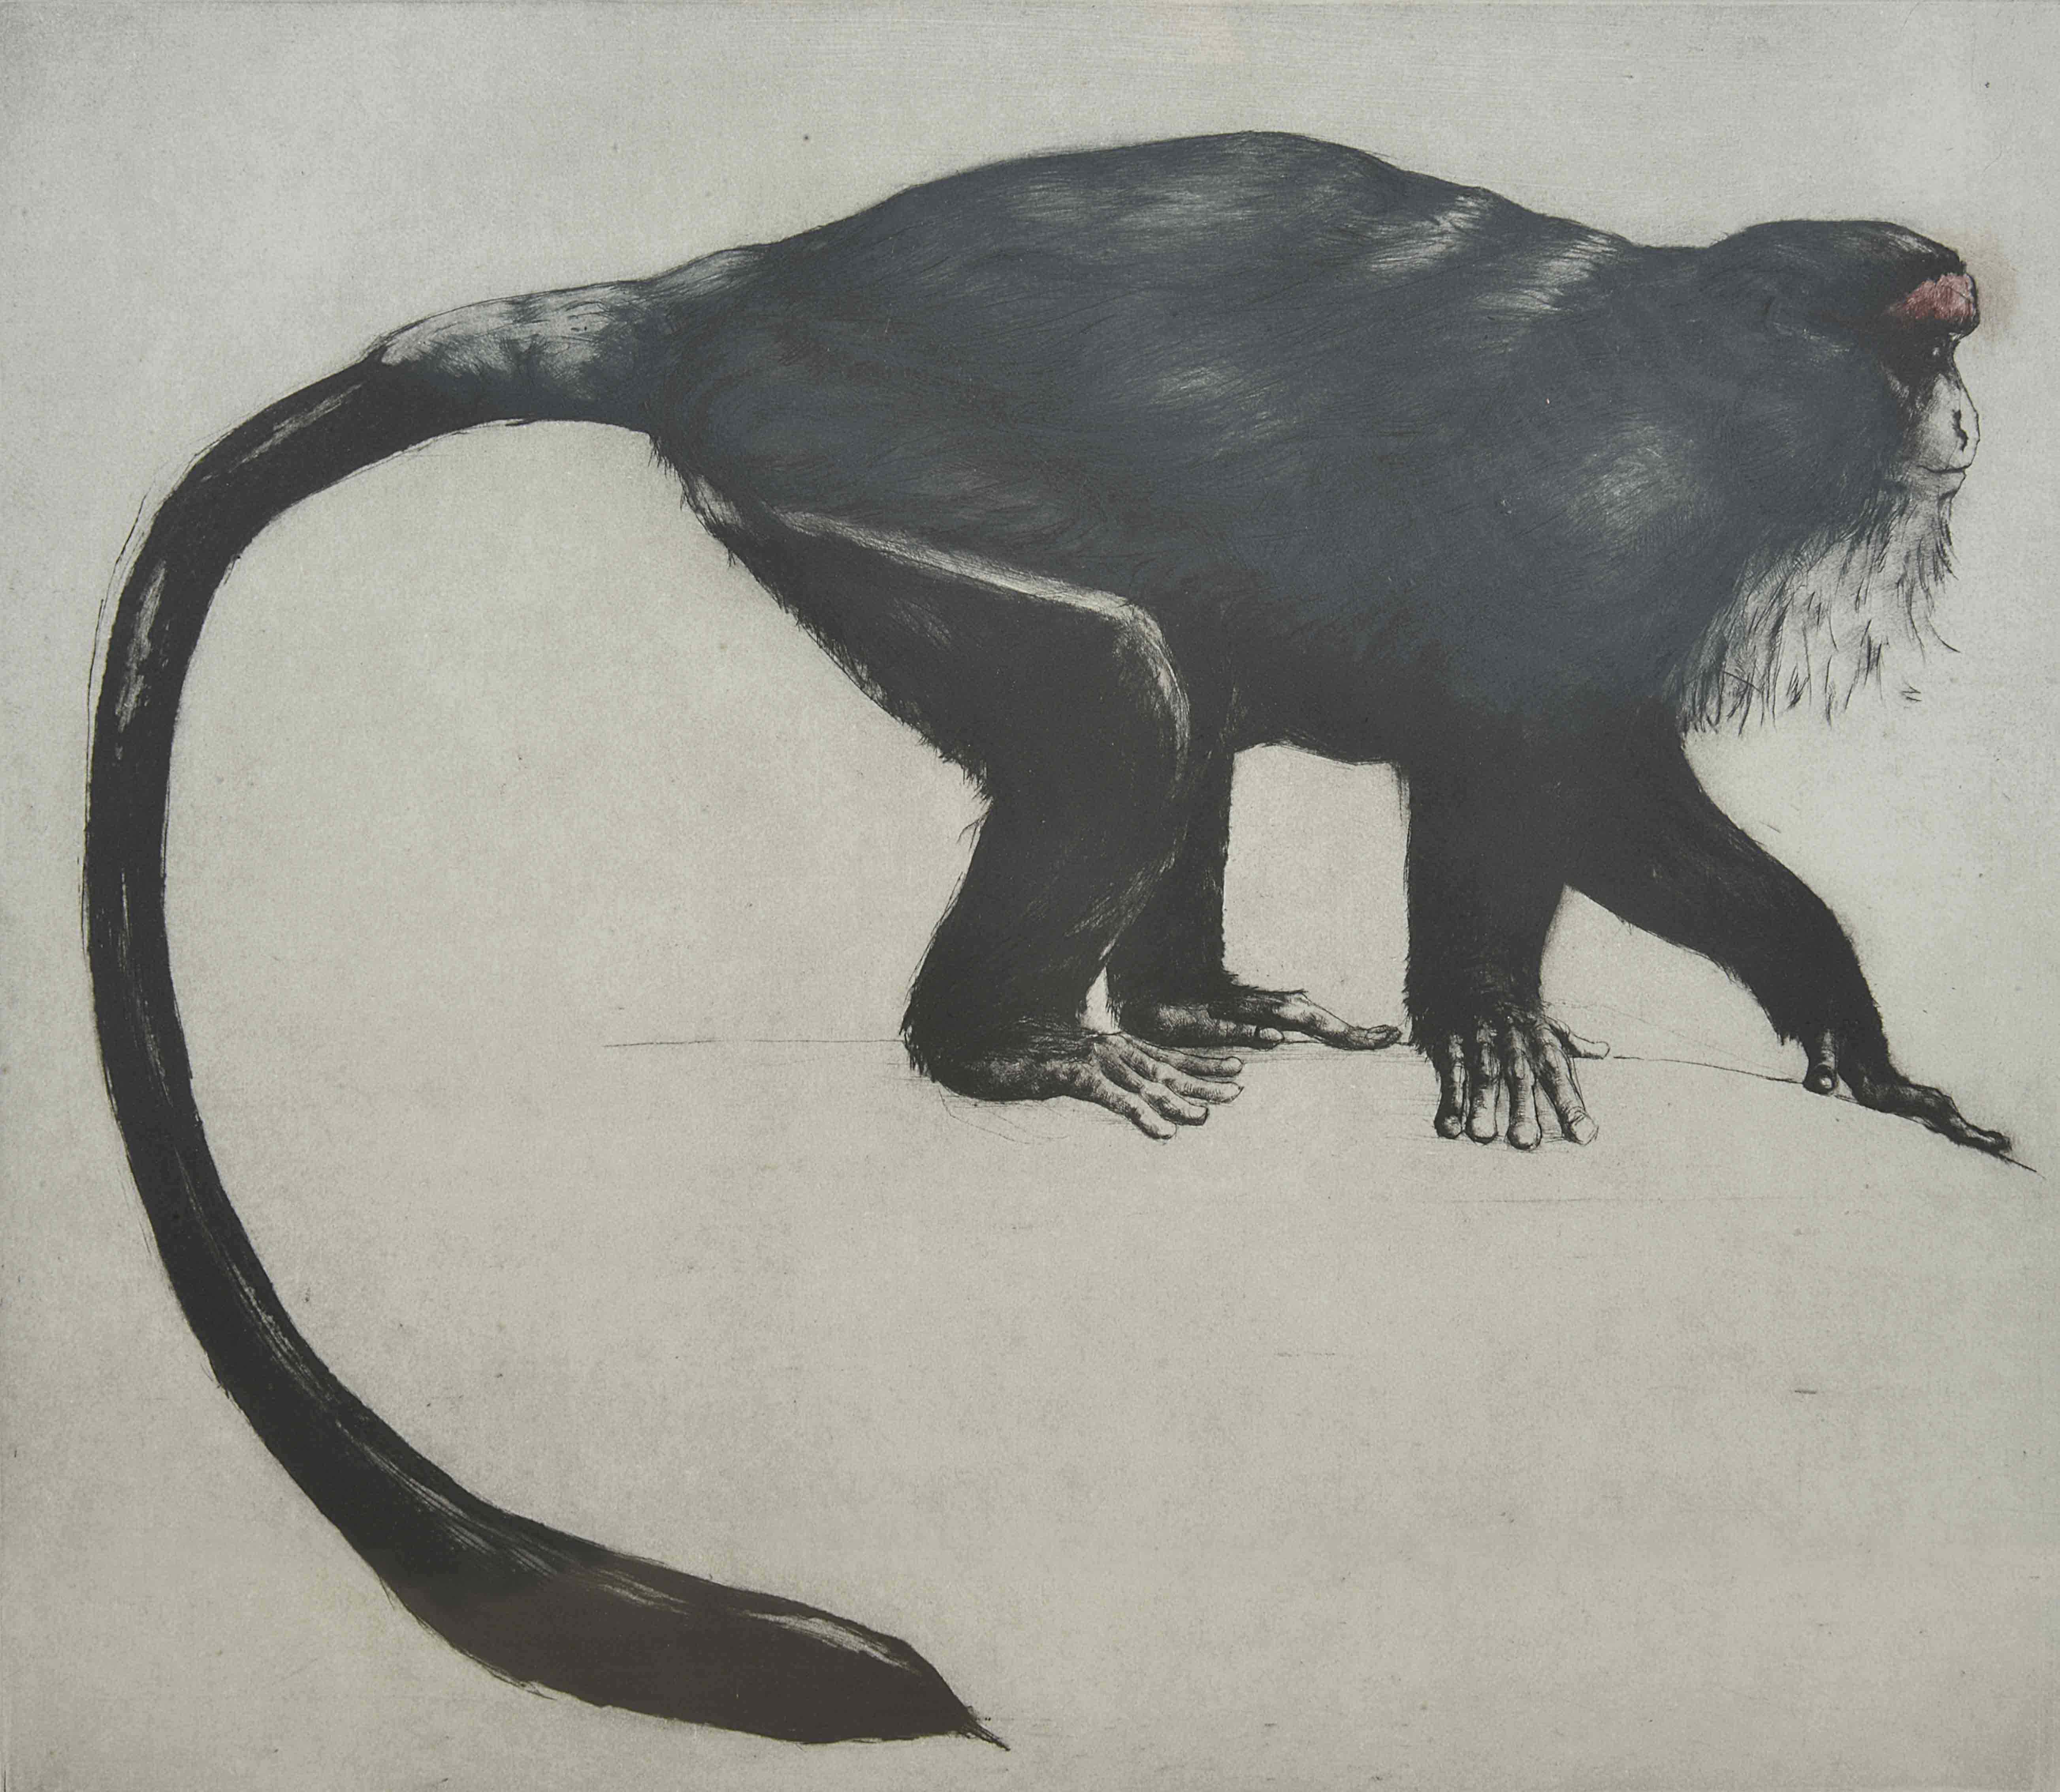 H Fry (20th century) British, De Brazza, a Capuchin monkey, engraving, artists proof, signed and